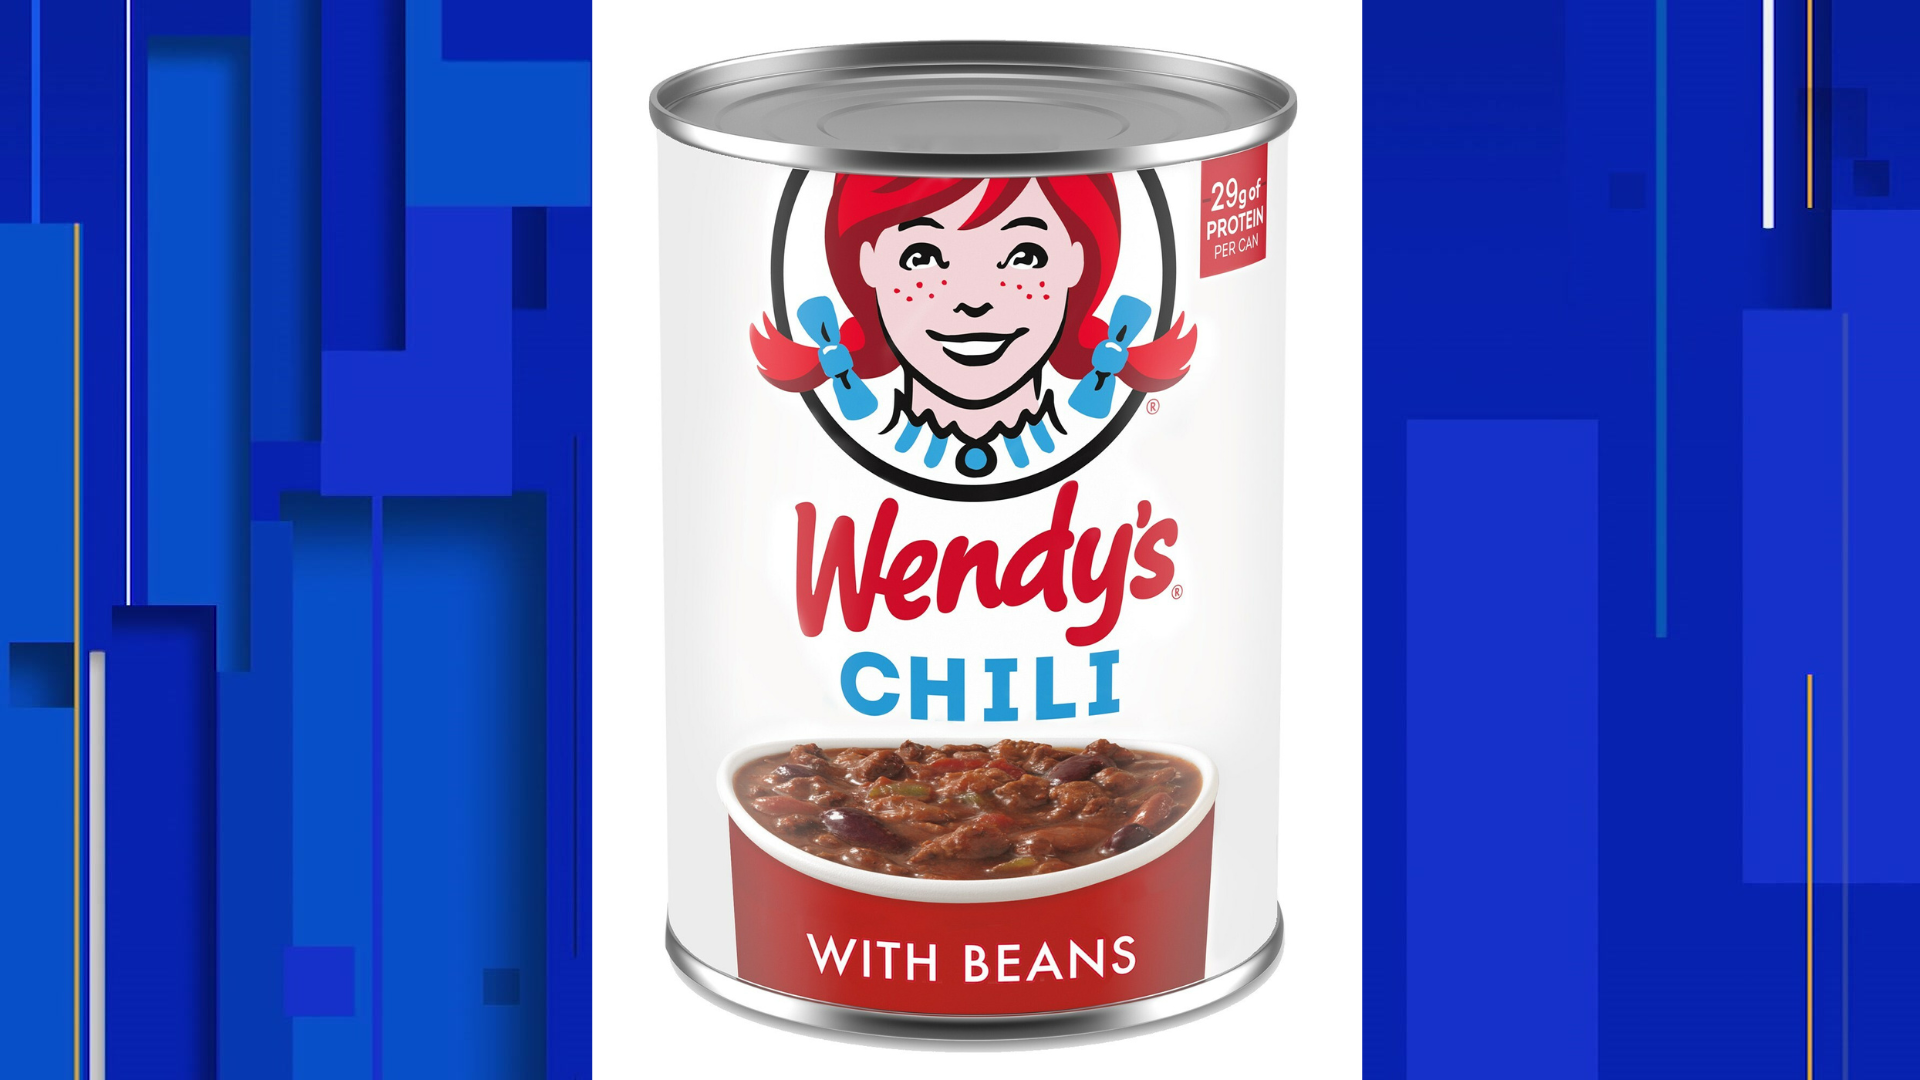 You Can Buy Wendy's Chili at Grocery Stores for the First Time Ever